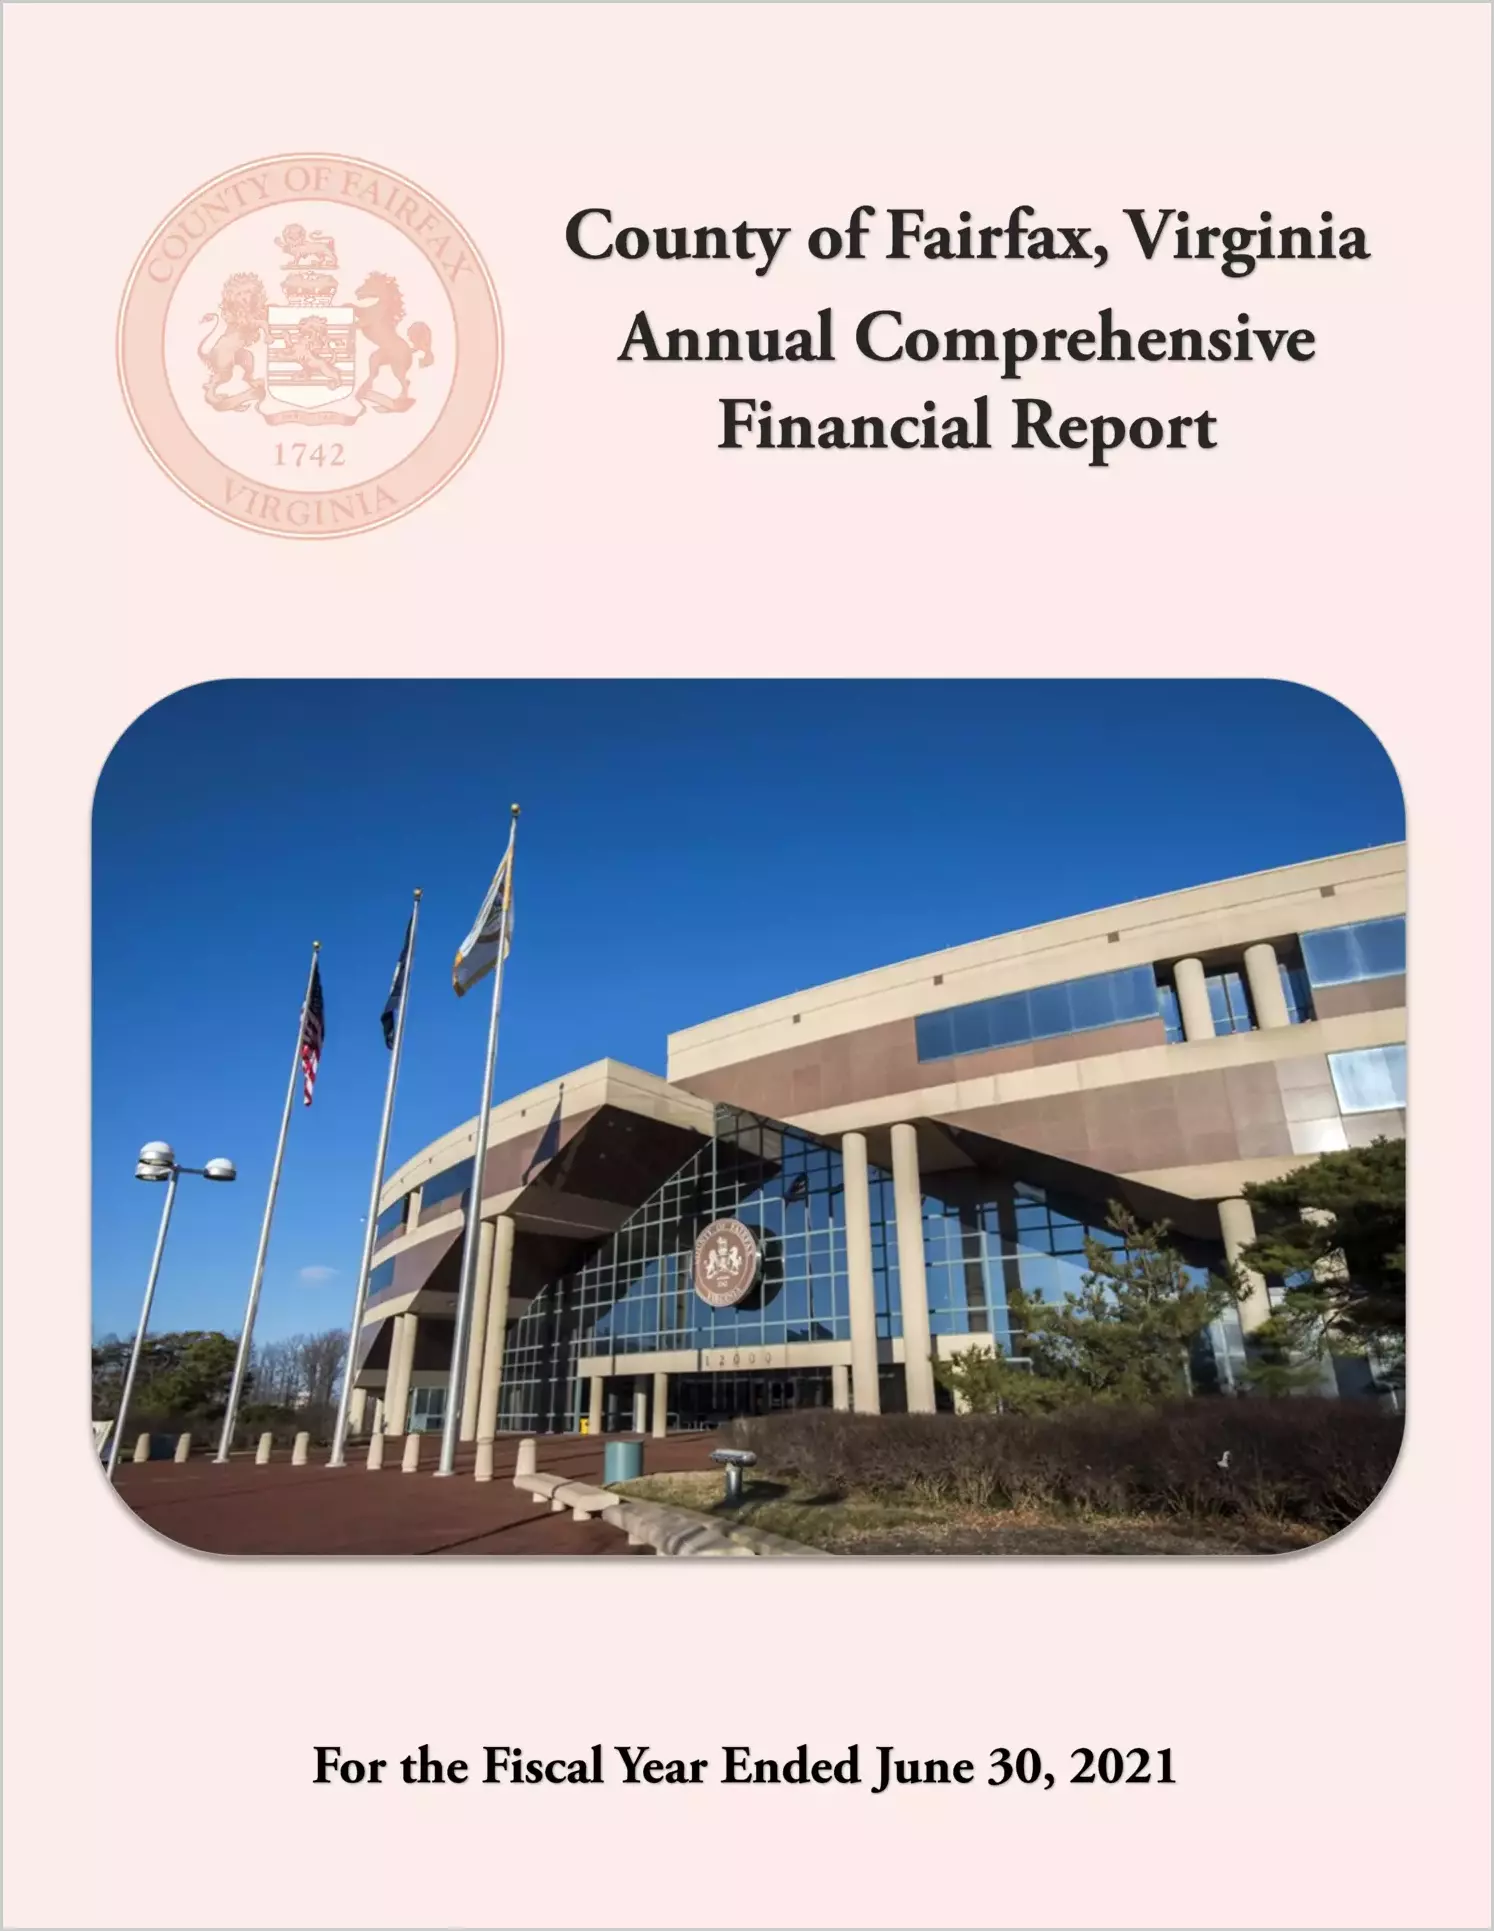 2021 Annual Financial Report for County of Fairfax